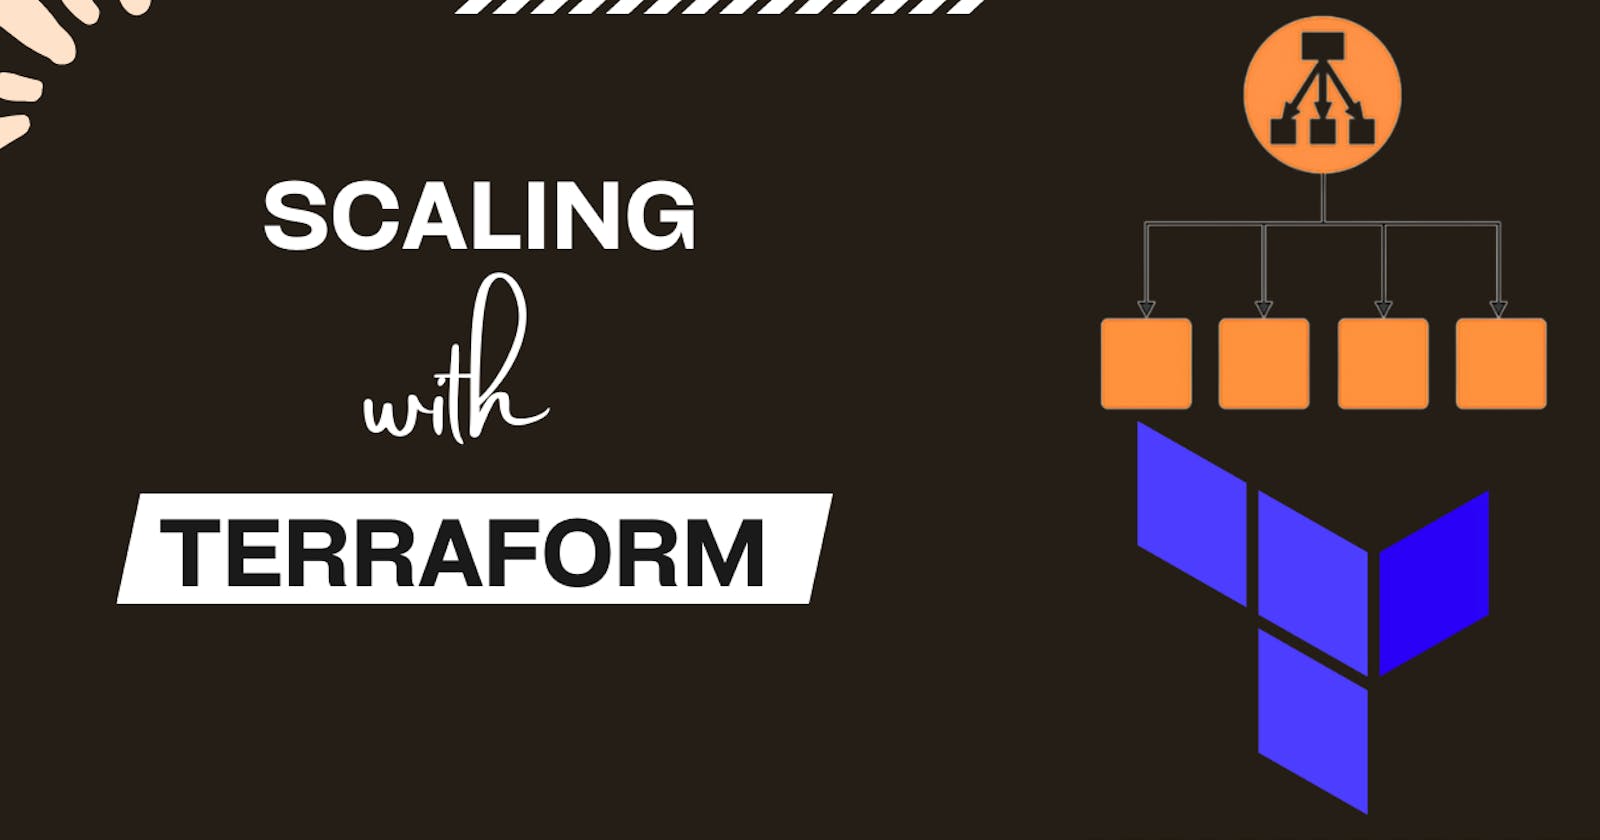 Scaling with Terraform